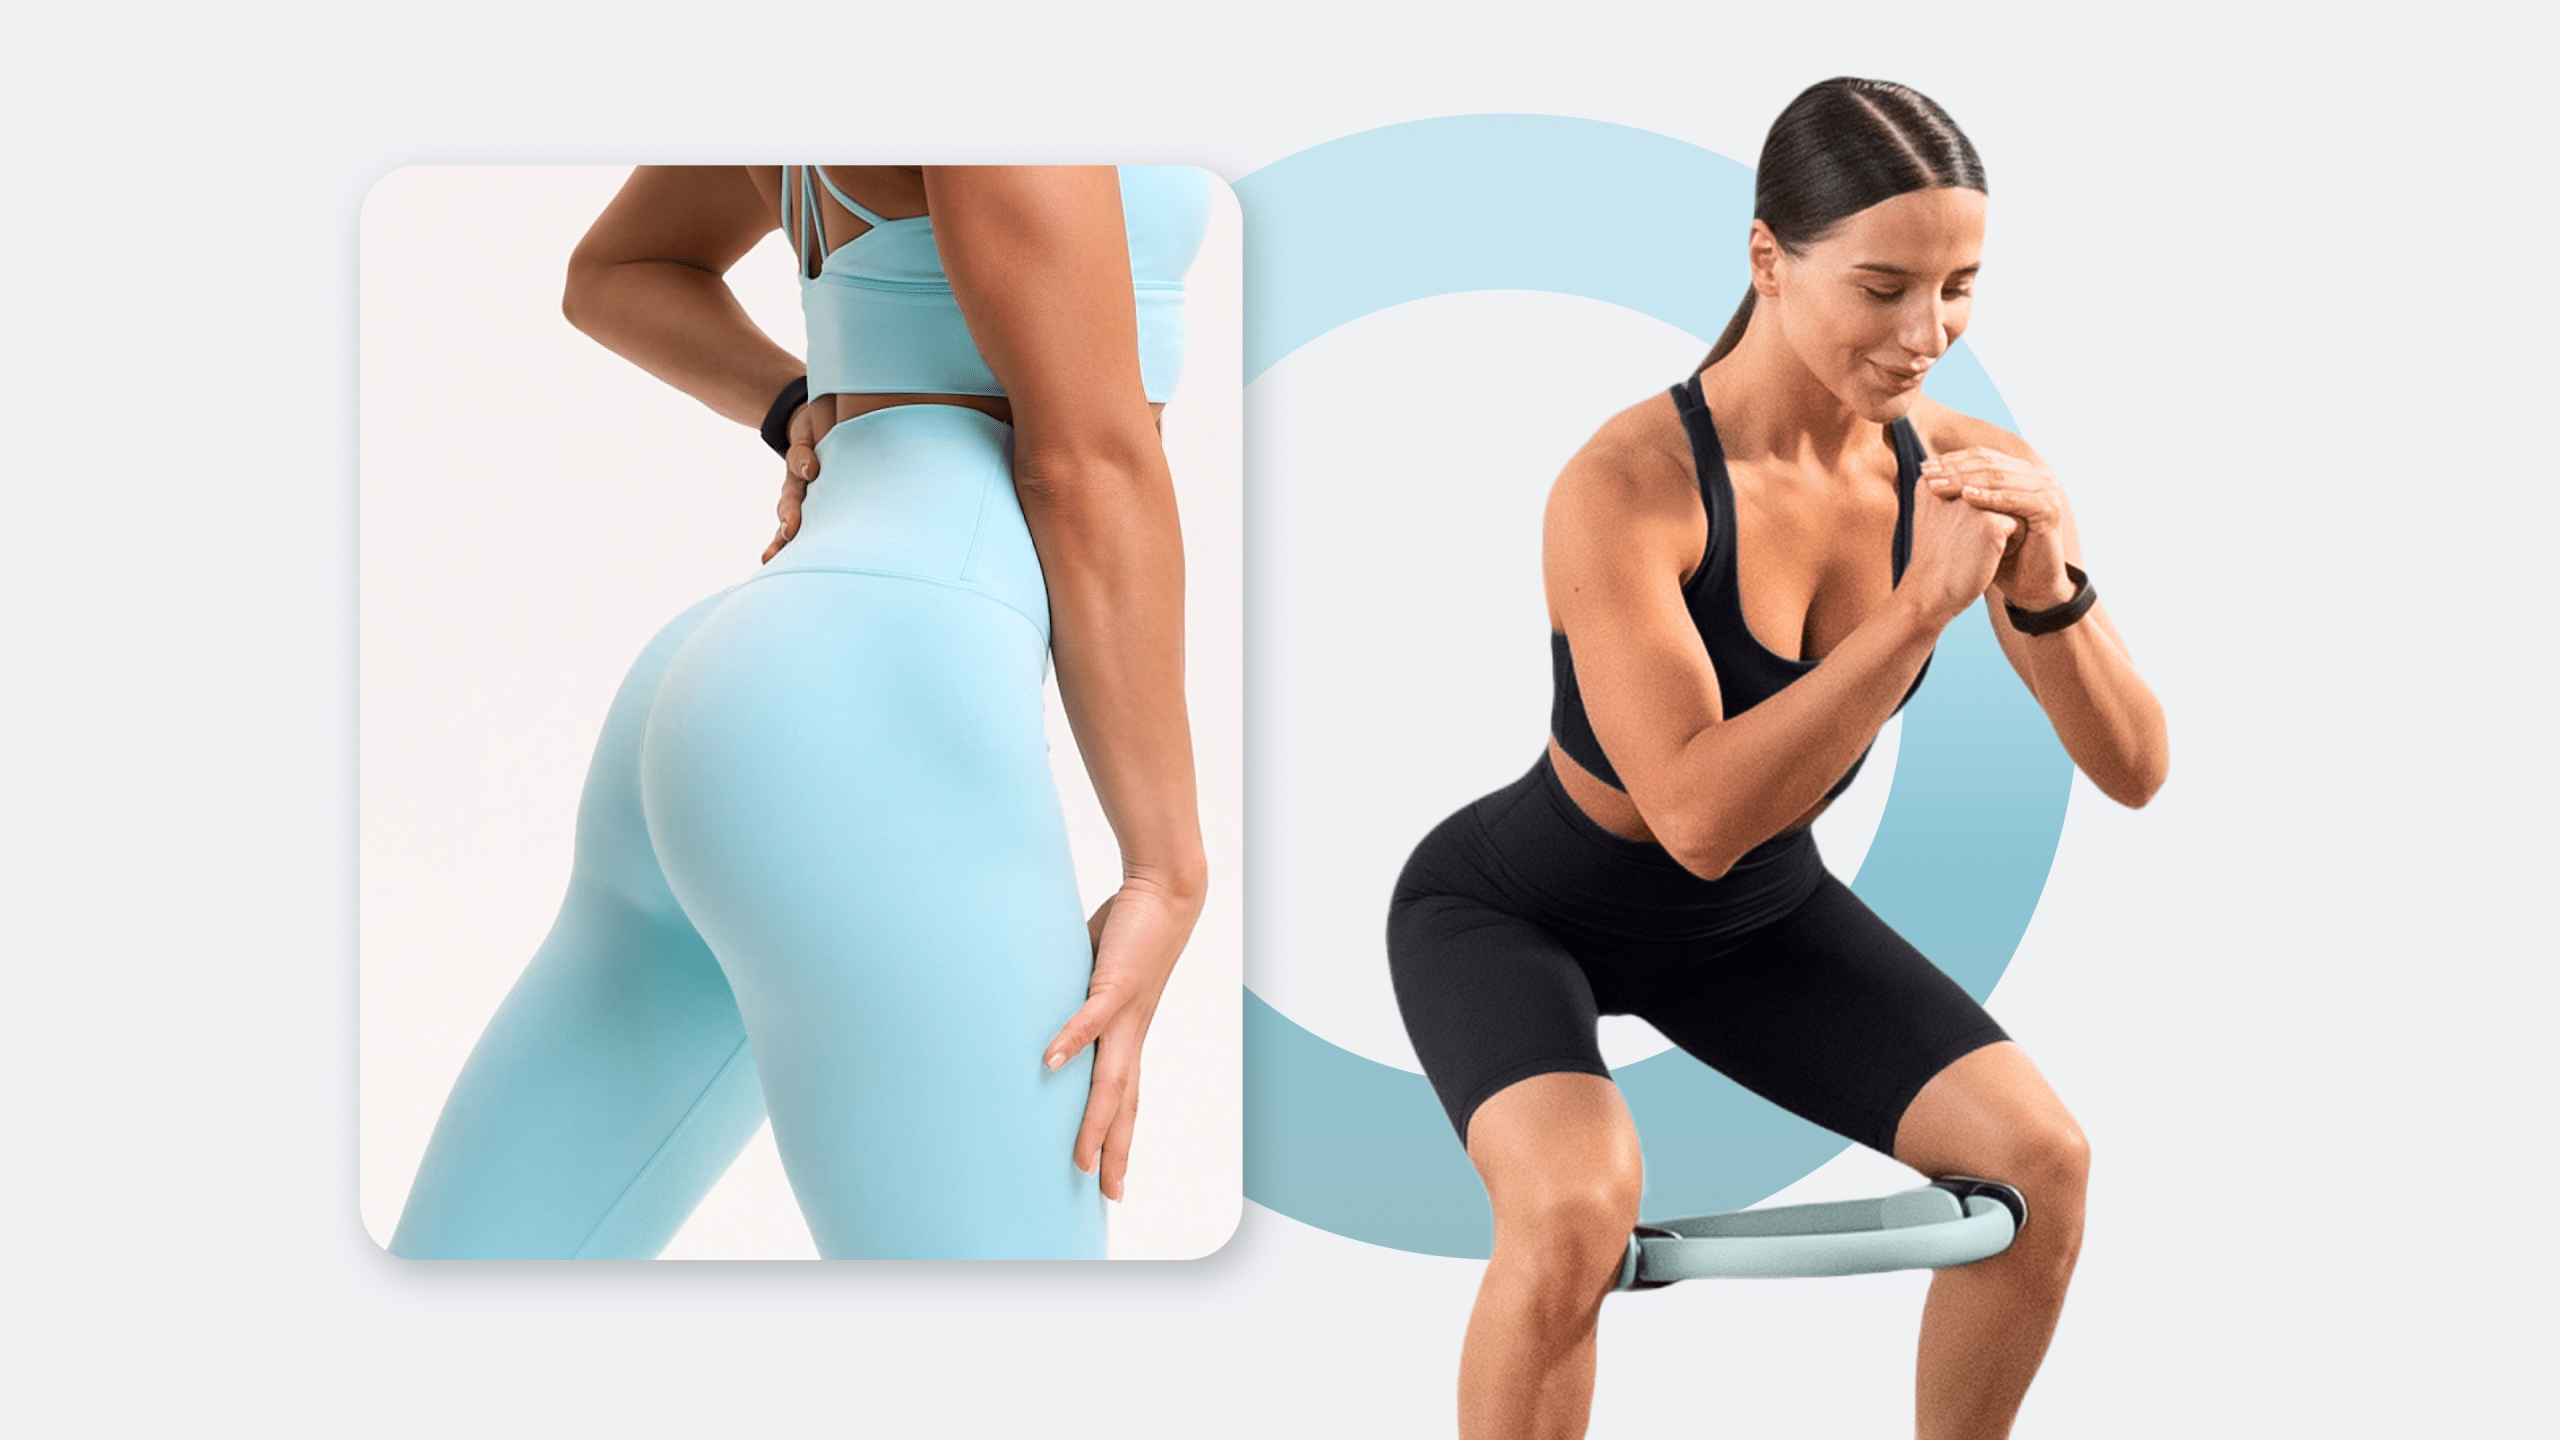 Shape Your Glutes: The Best Exercises for Sculpting Your Glutes